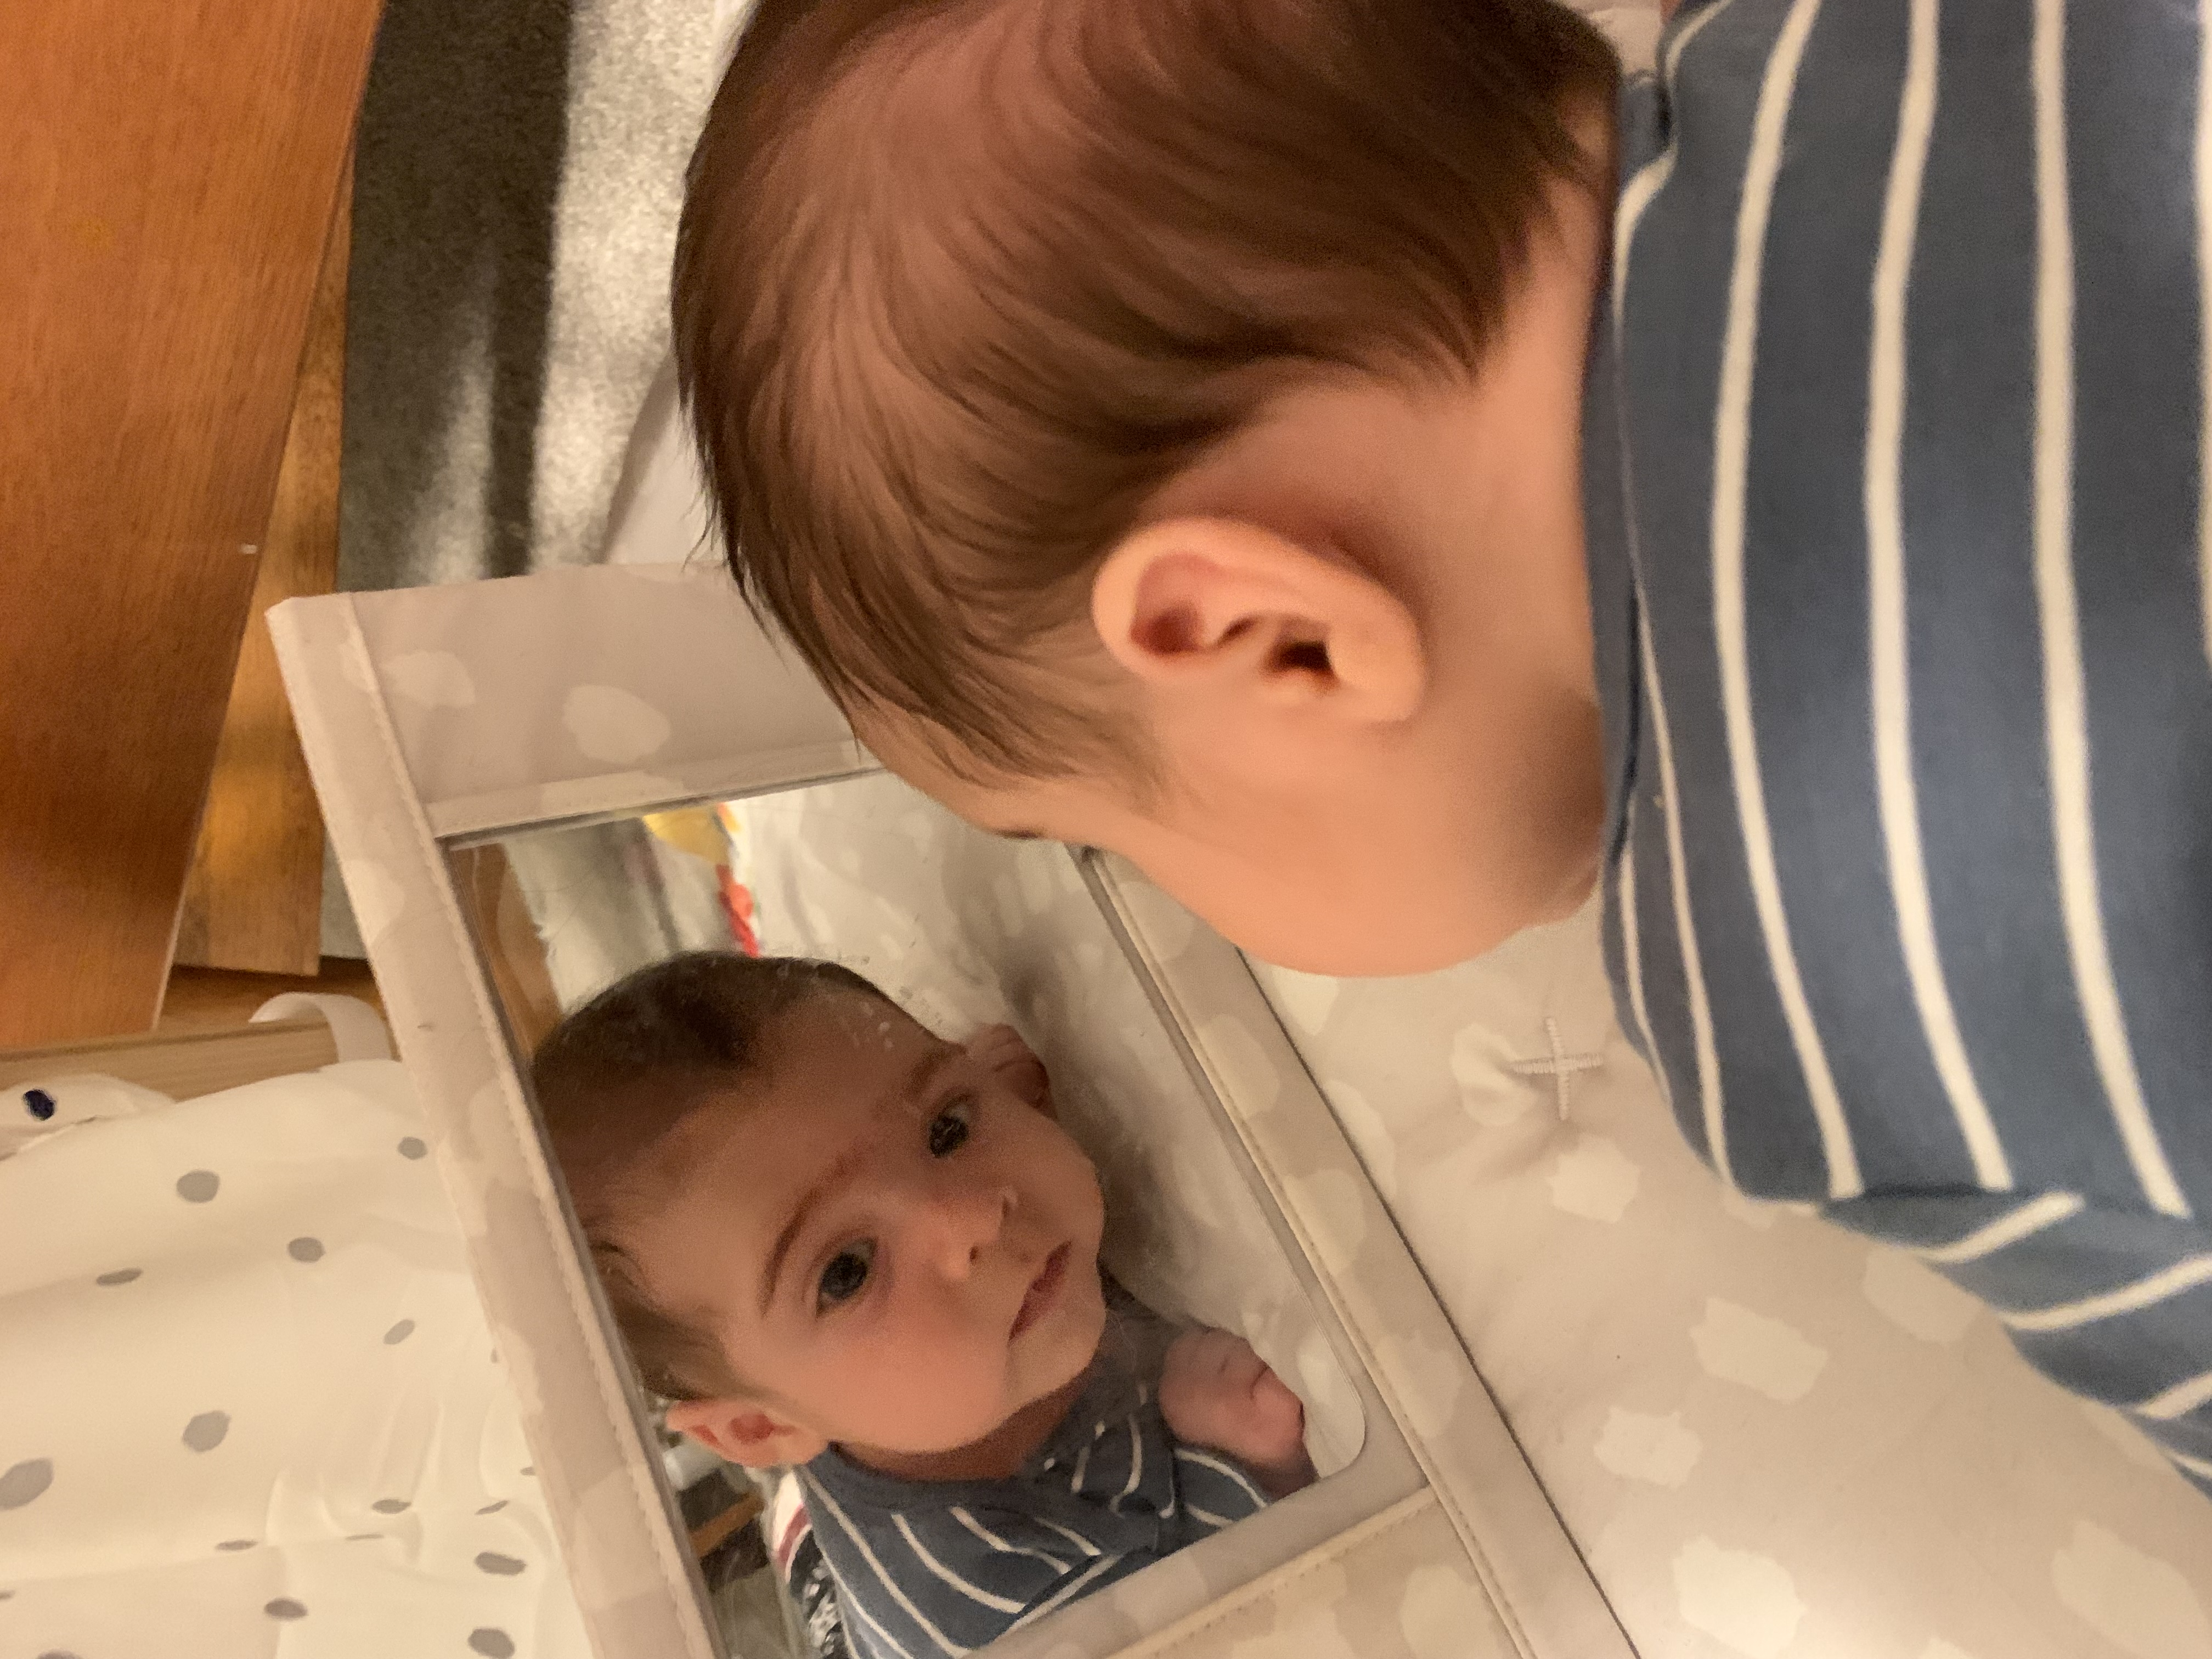 Young infant looking at caregiver in mirror reflection